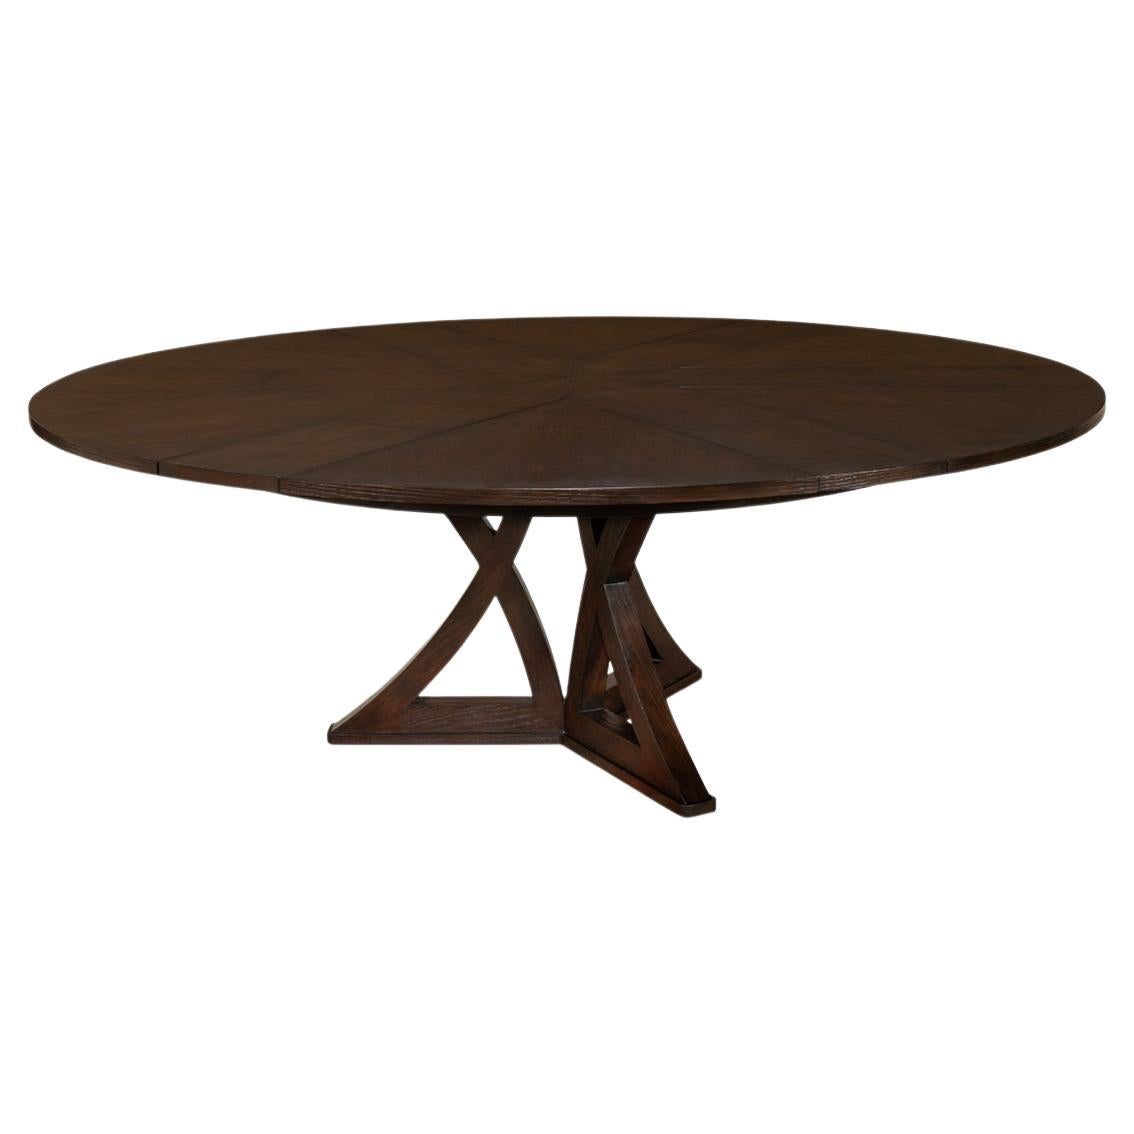 Rustic Round Dining Table, Burnt Brown Oak For Sale